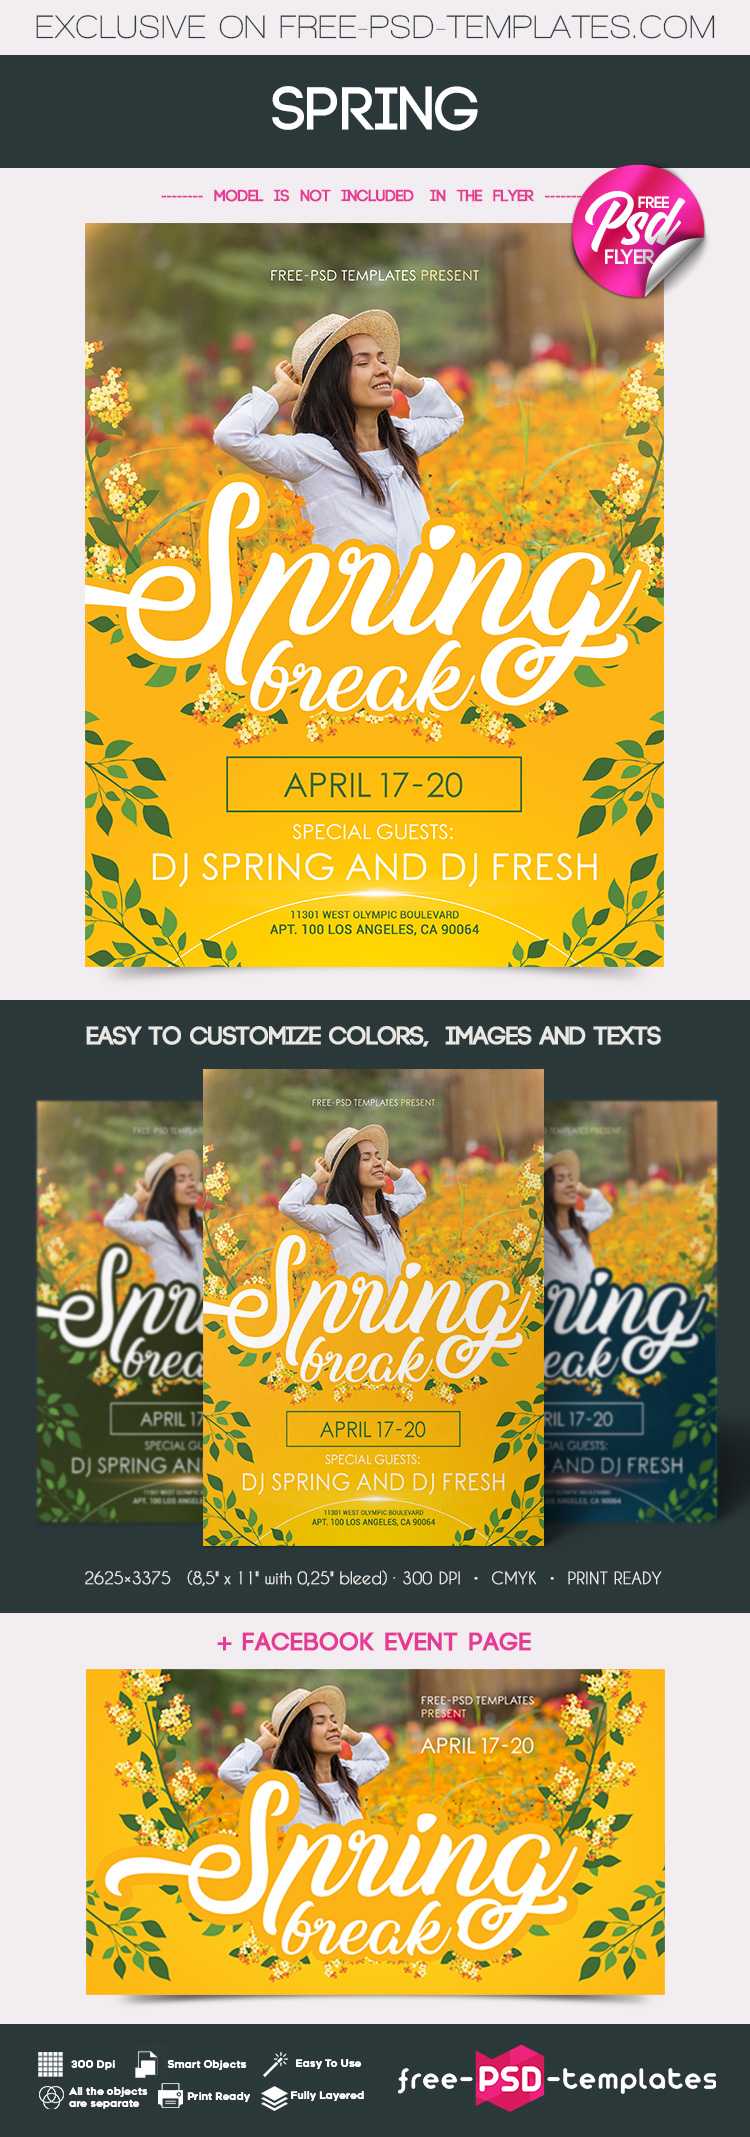 Free Spring Flyer In Psd | Free Psd Templates For Free Spring Flyer Templates